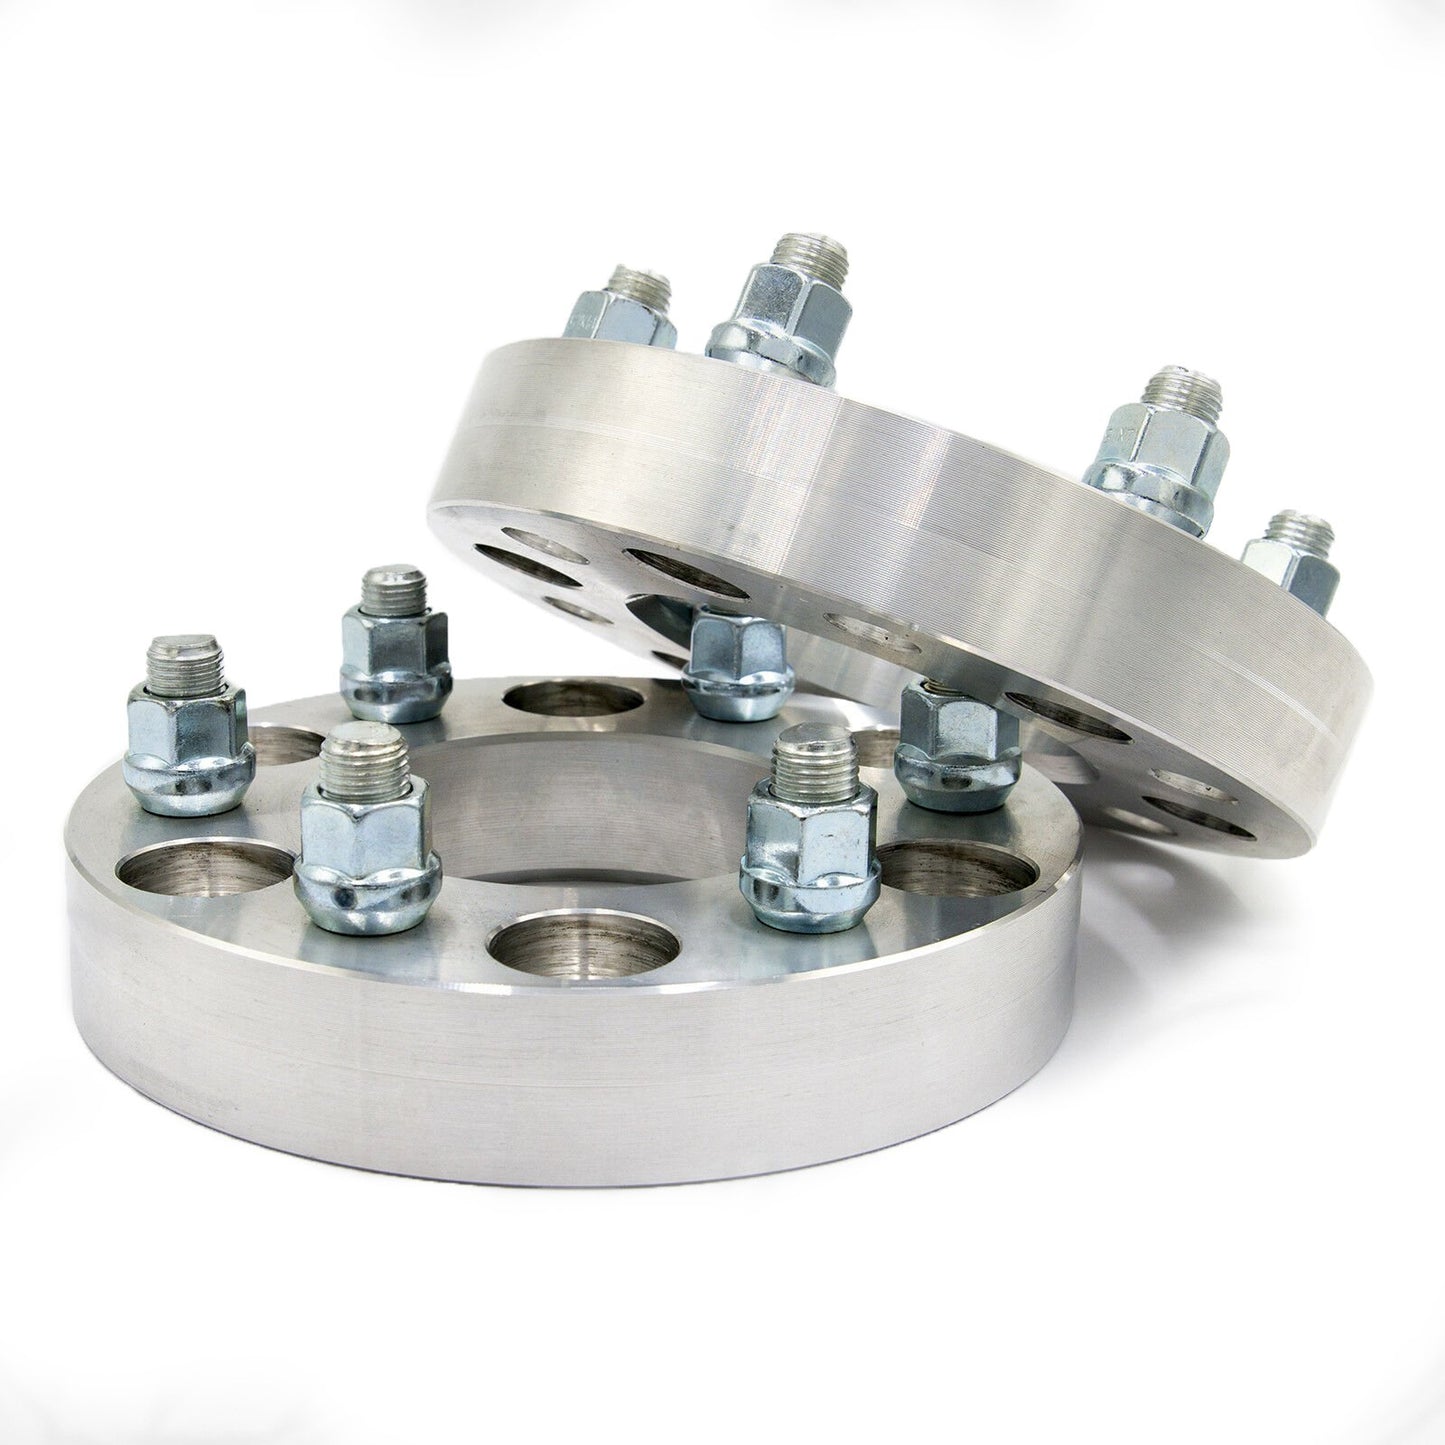 6x5" to 6x5.5" Wheel Spacer/Adapter - Thickness: 3/4"- 4"